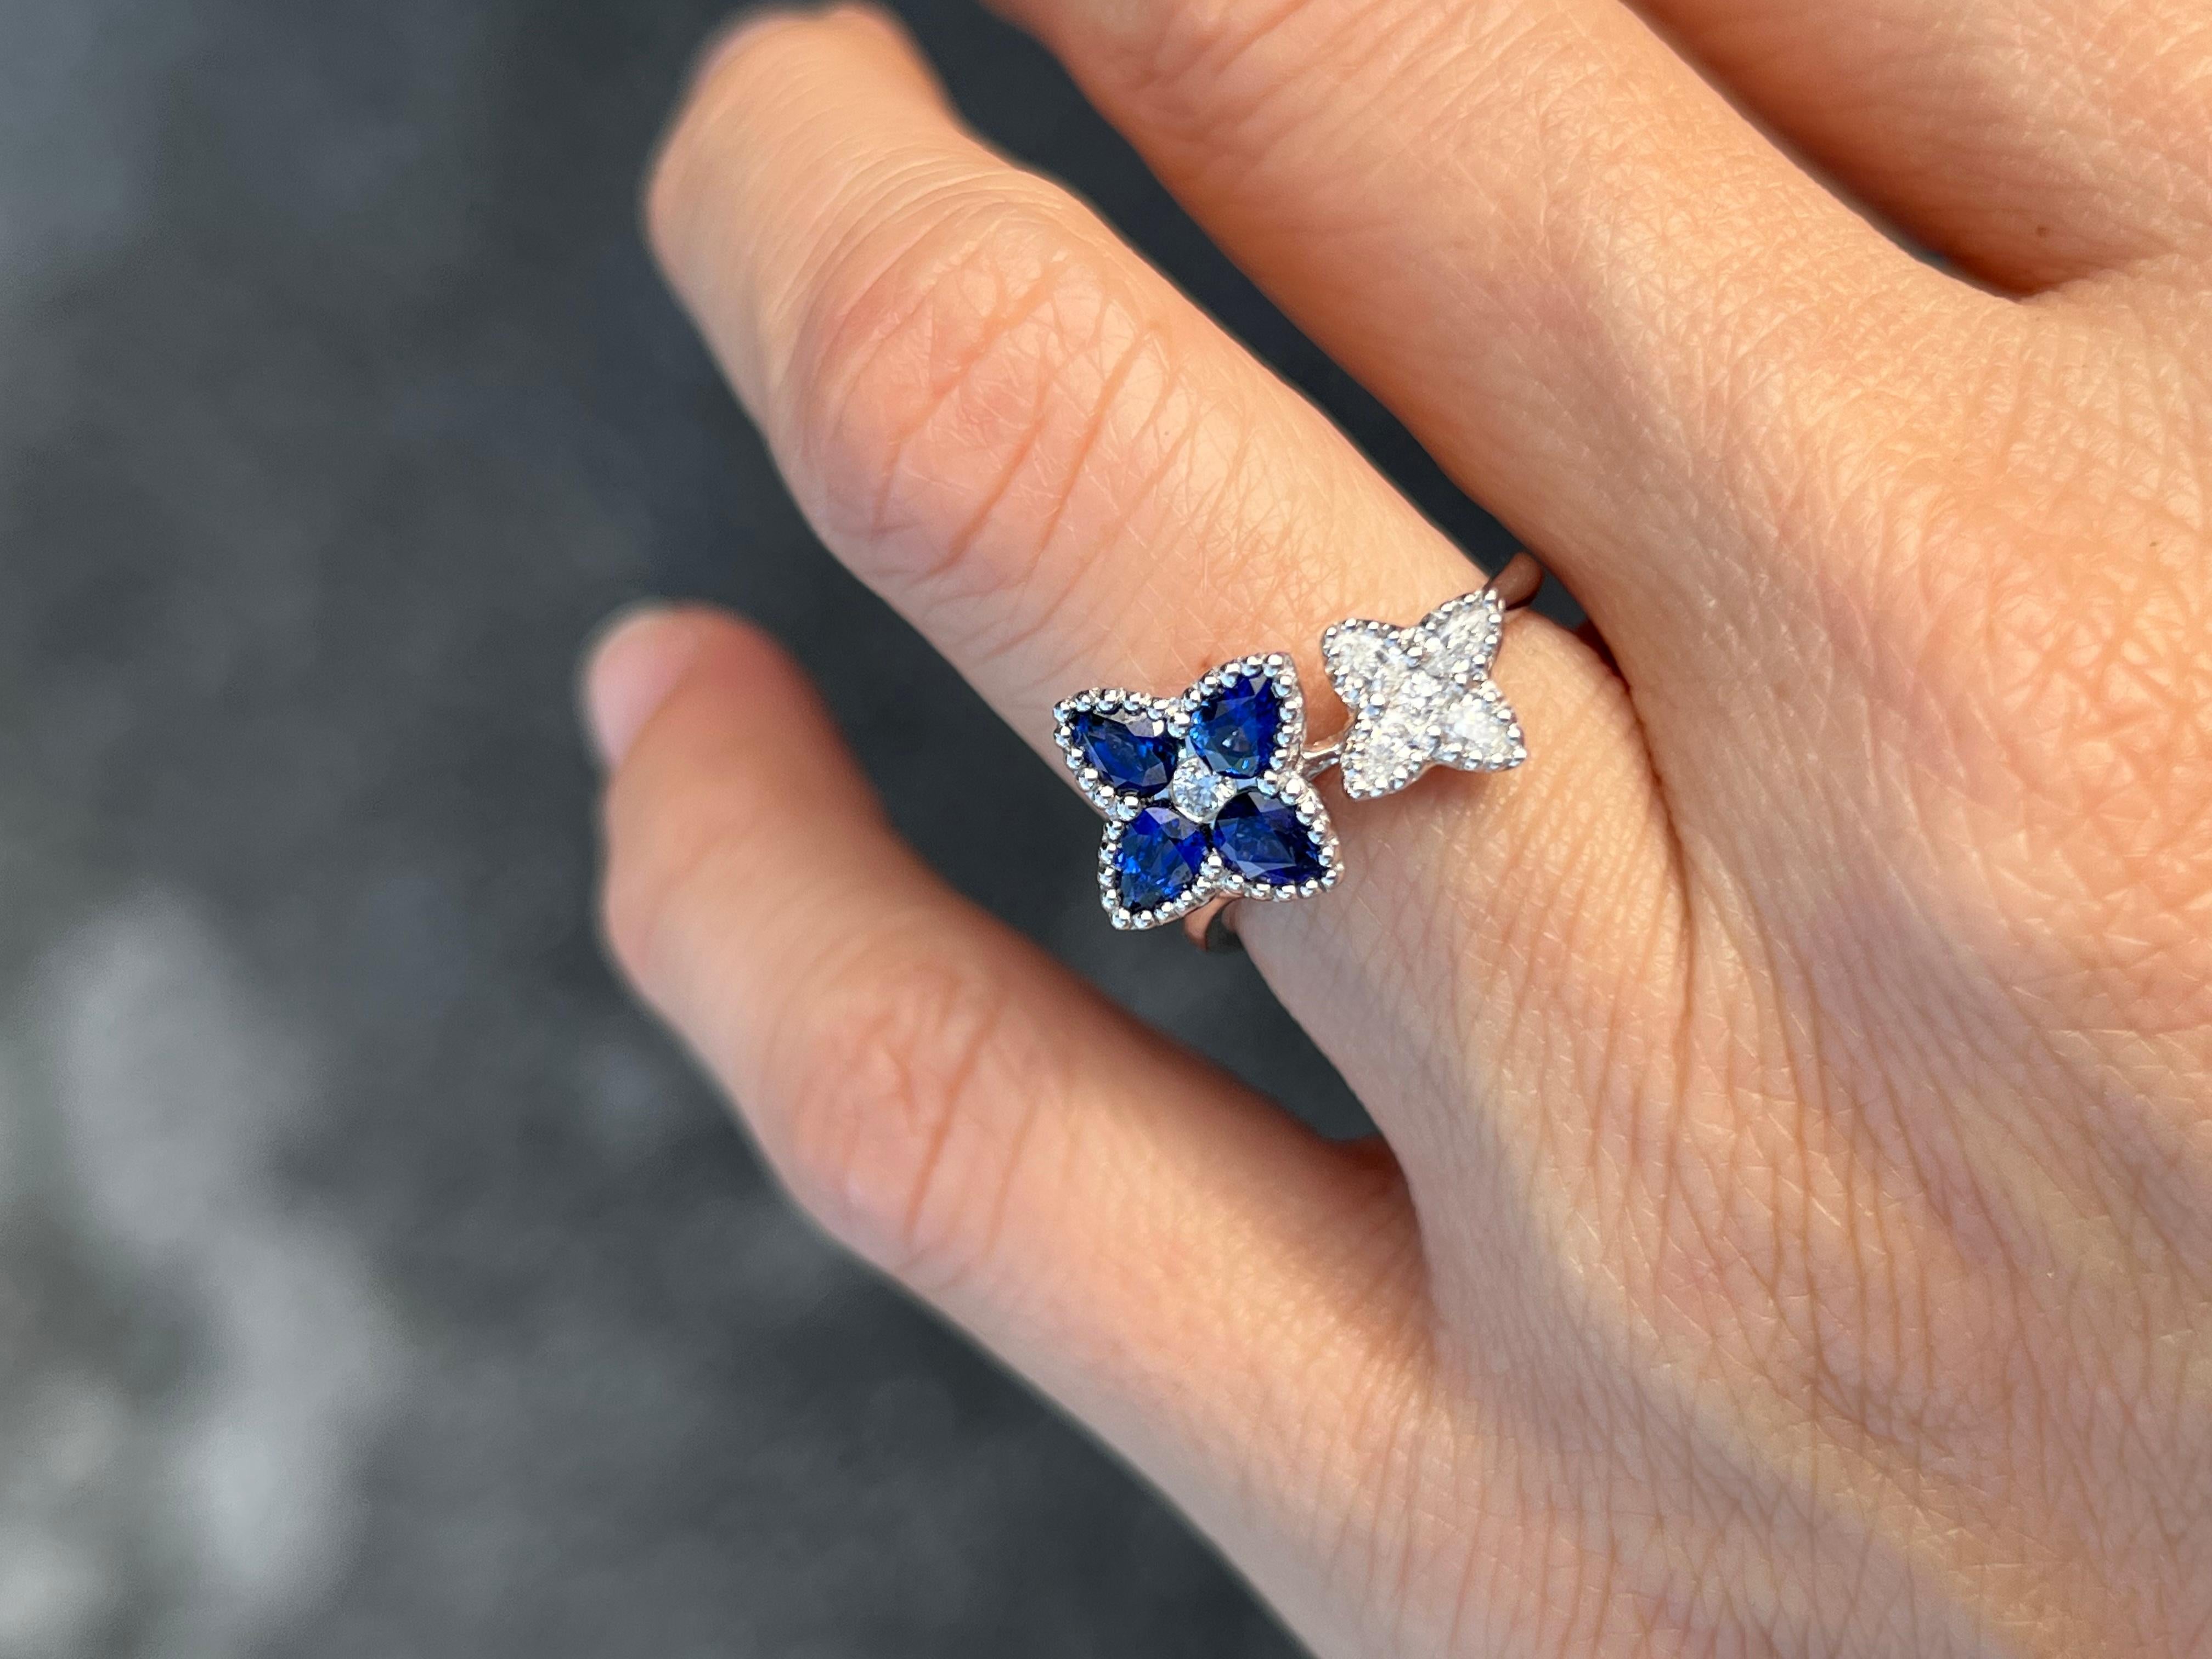 18K white gold ring with pear shaped sapphires that make a clover shape with a round diamond in the center. Also, a second clover made of pear shaped diamonds with a small round diamond in the center. 

Features
18K white gold
1.07 carat total